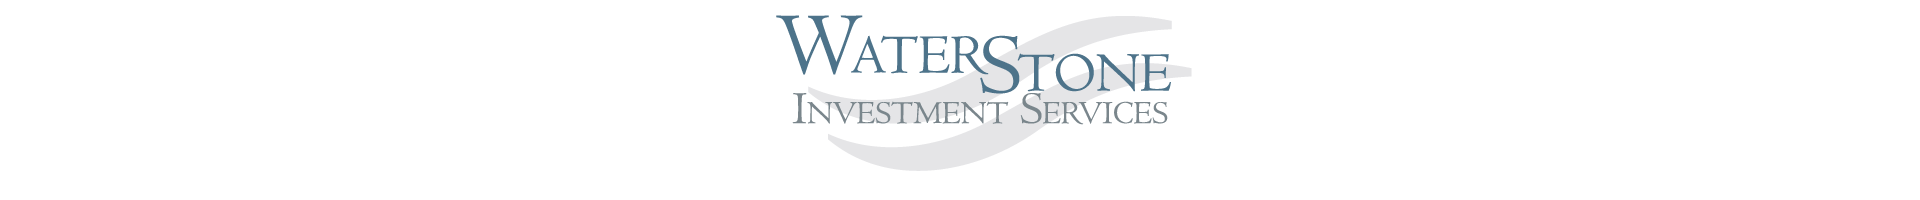 WaterStone Investment Services